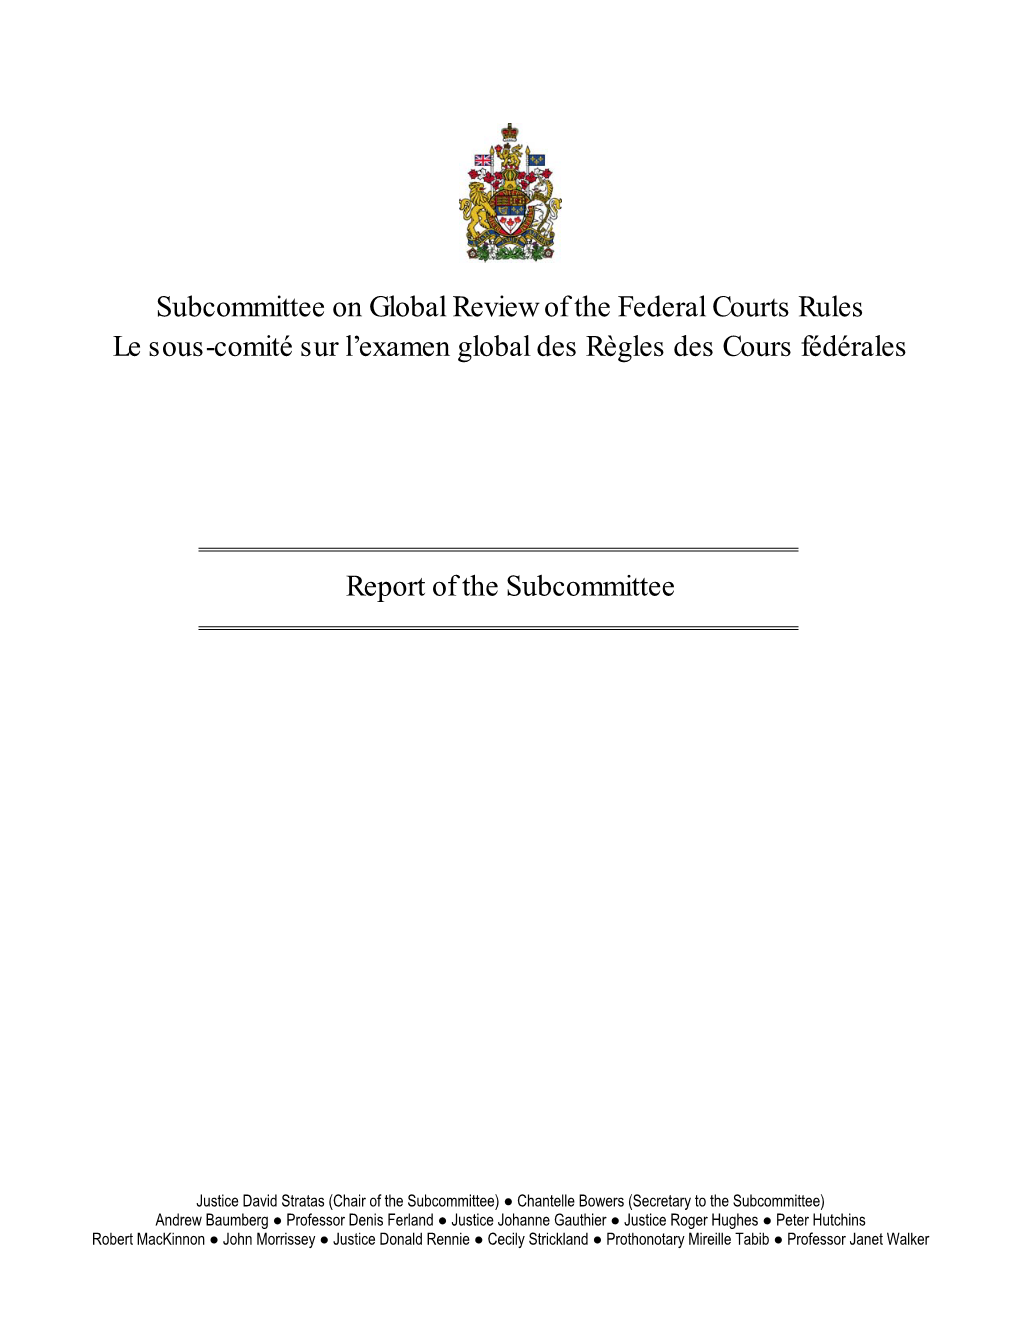 Report of the Subcommittee on Global Review of the Federal Courts Rules